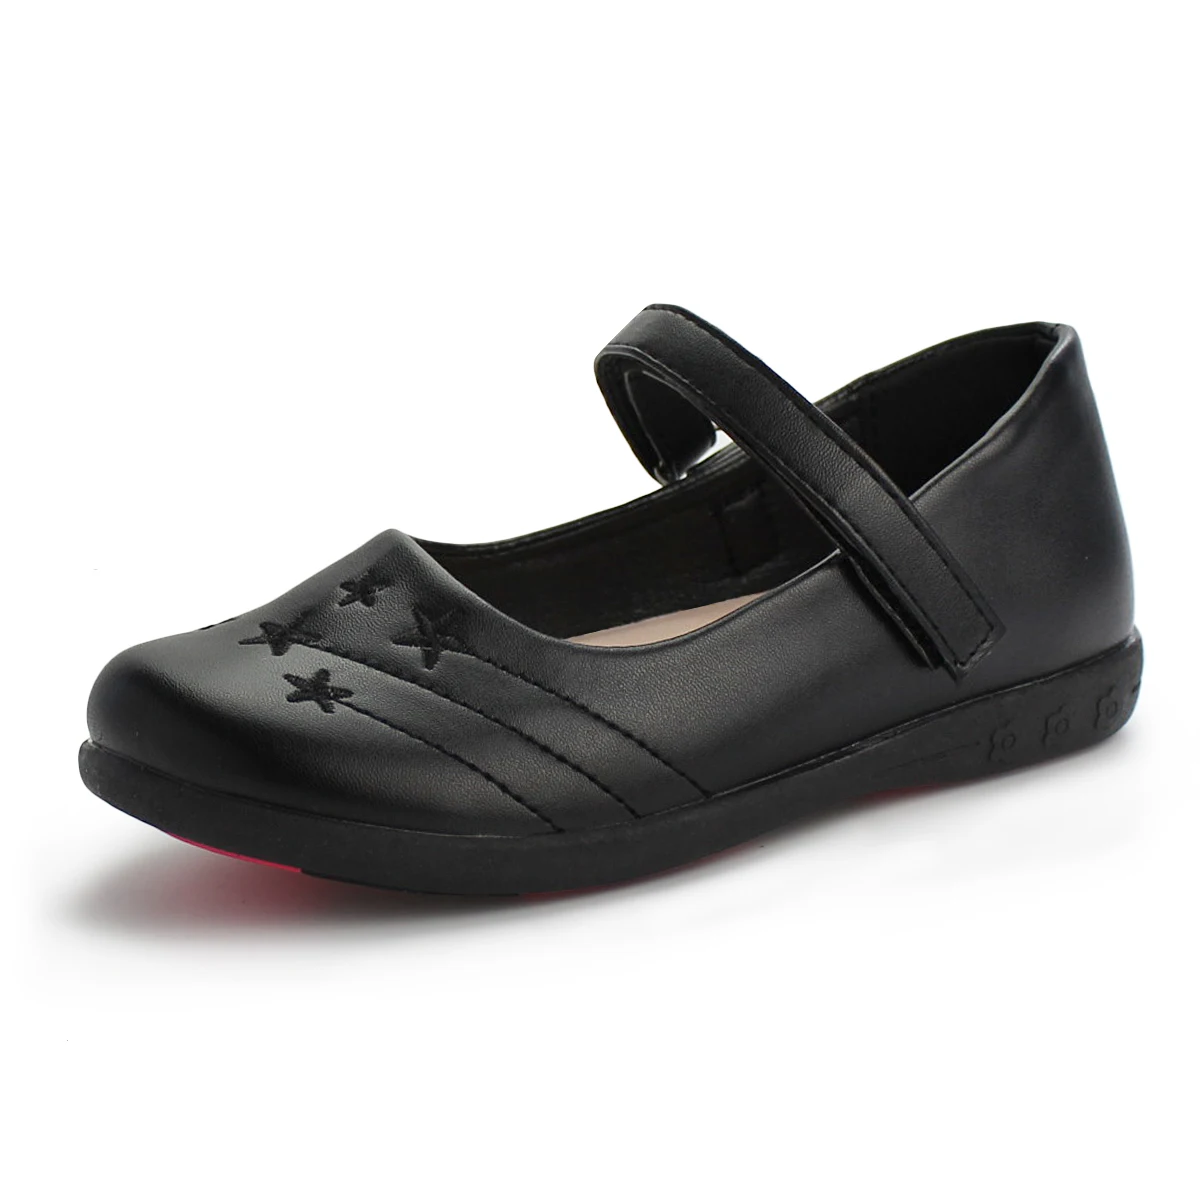 Kids Black School Shoes Uniform Mary Jane With Classic Round lightweight Girls School Shoes